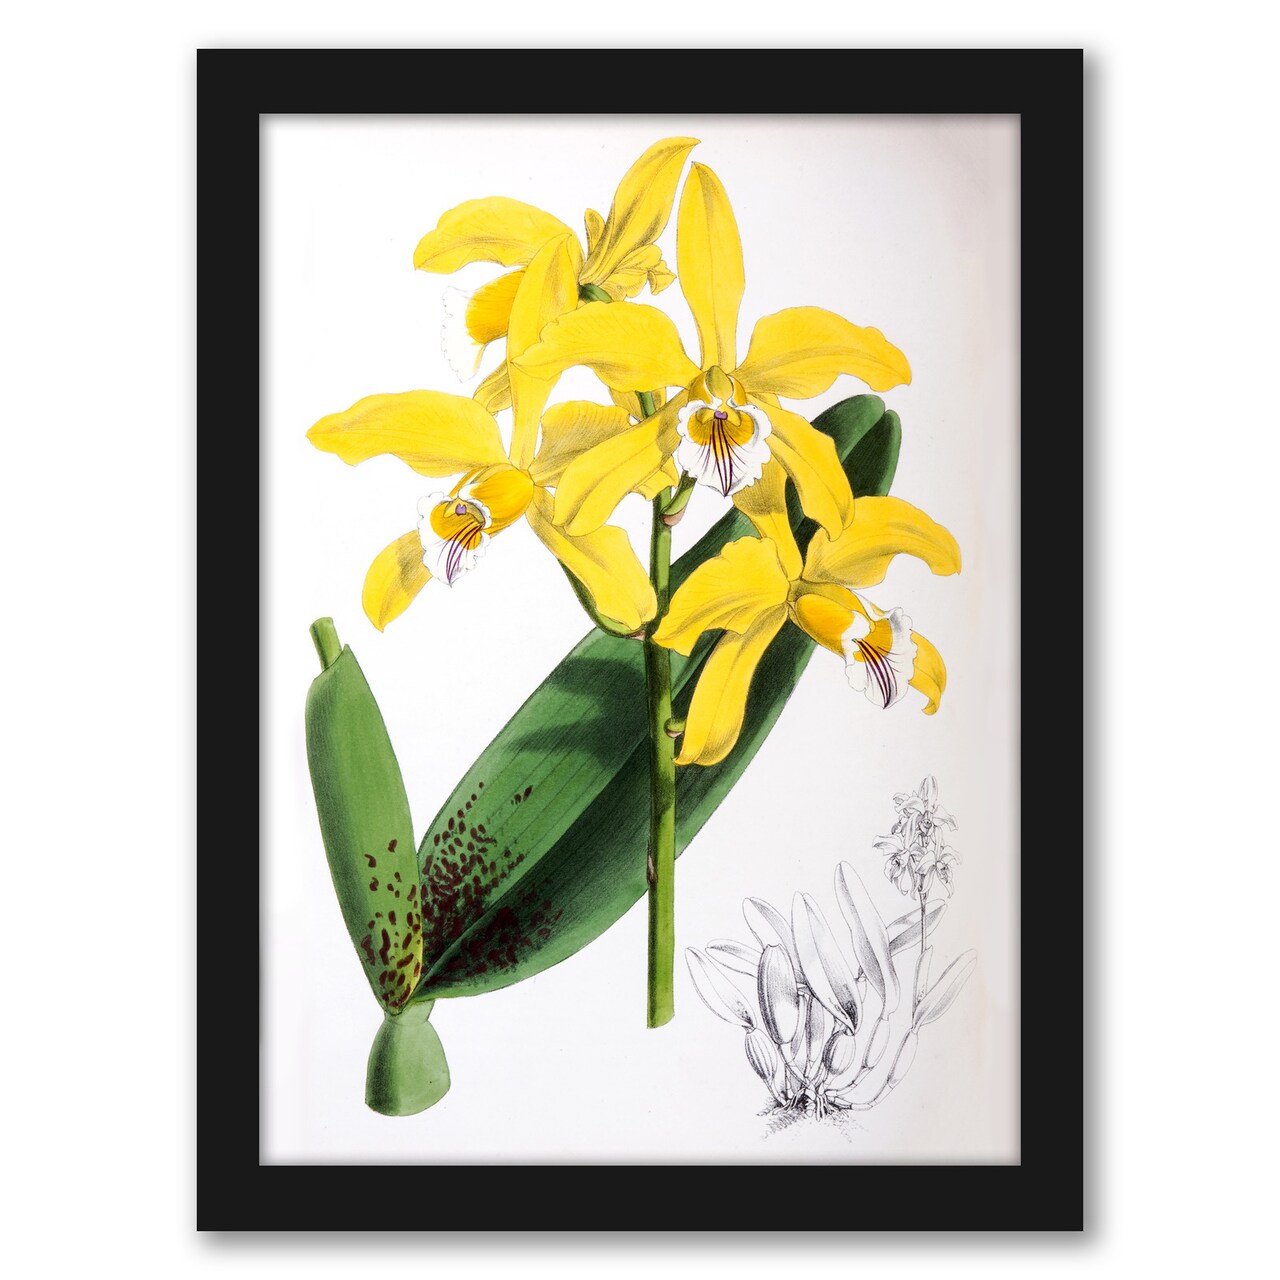 Fitch Orchid Laelia Xanthina by New York Botanical Garden Frame  - Americanflat